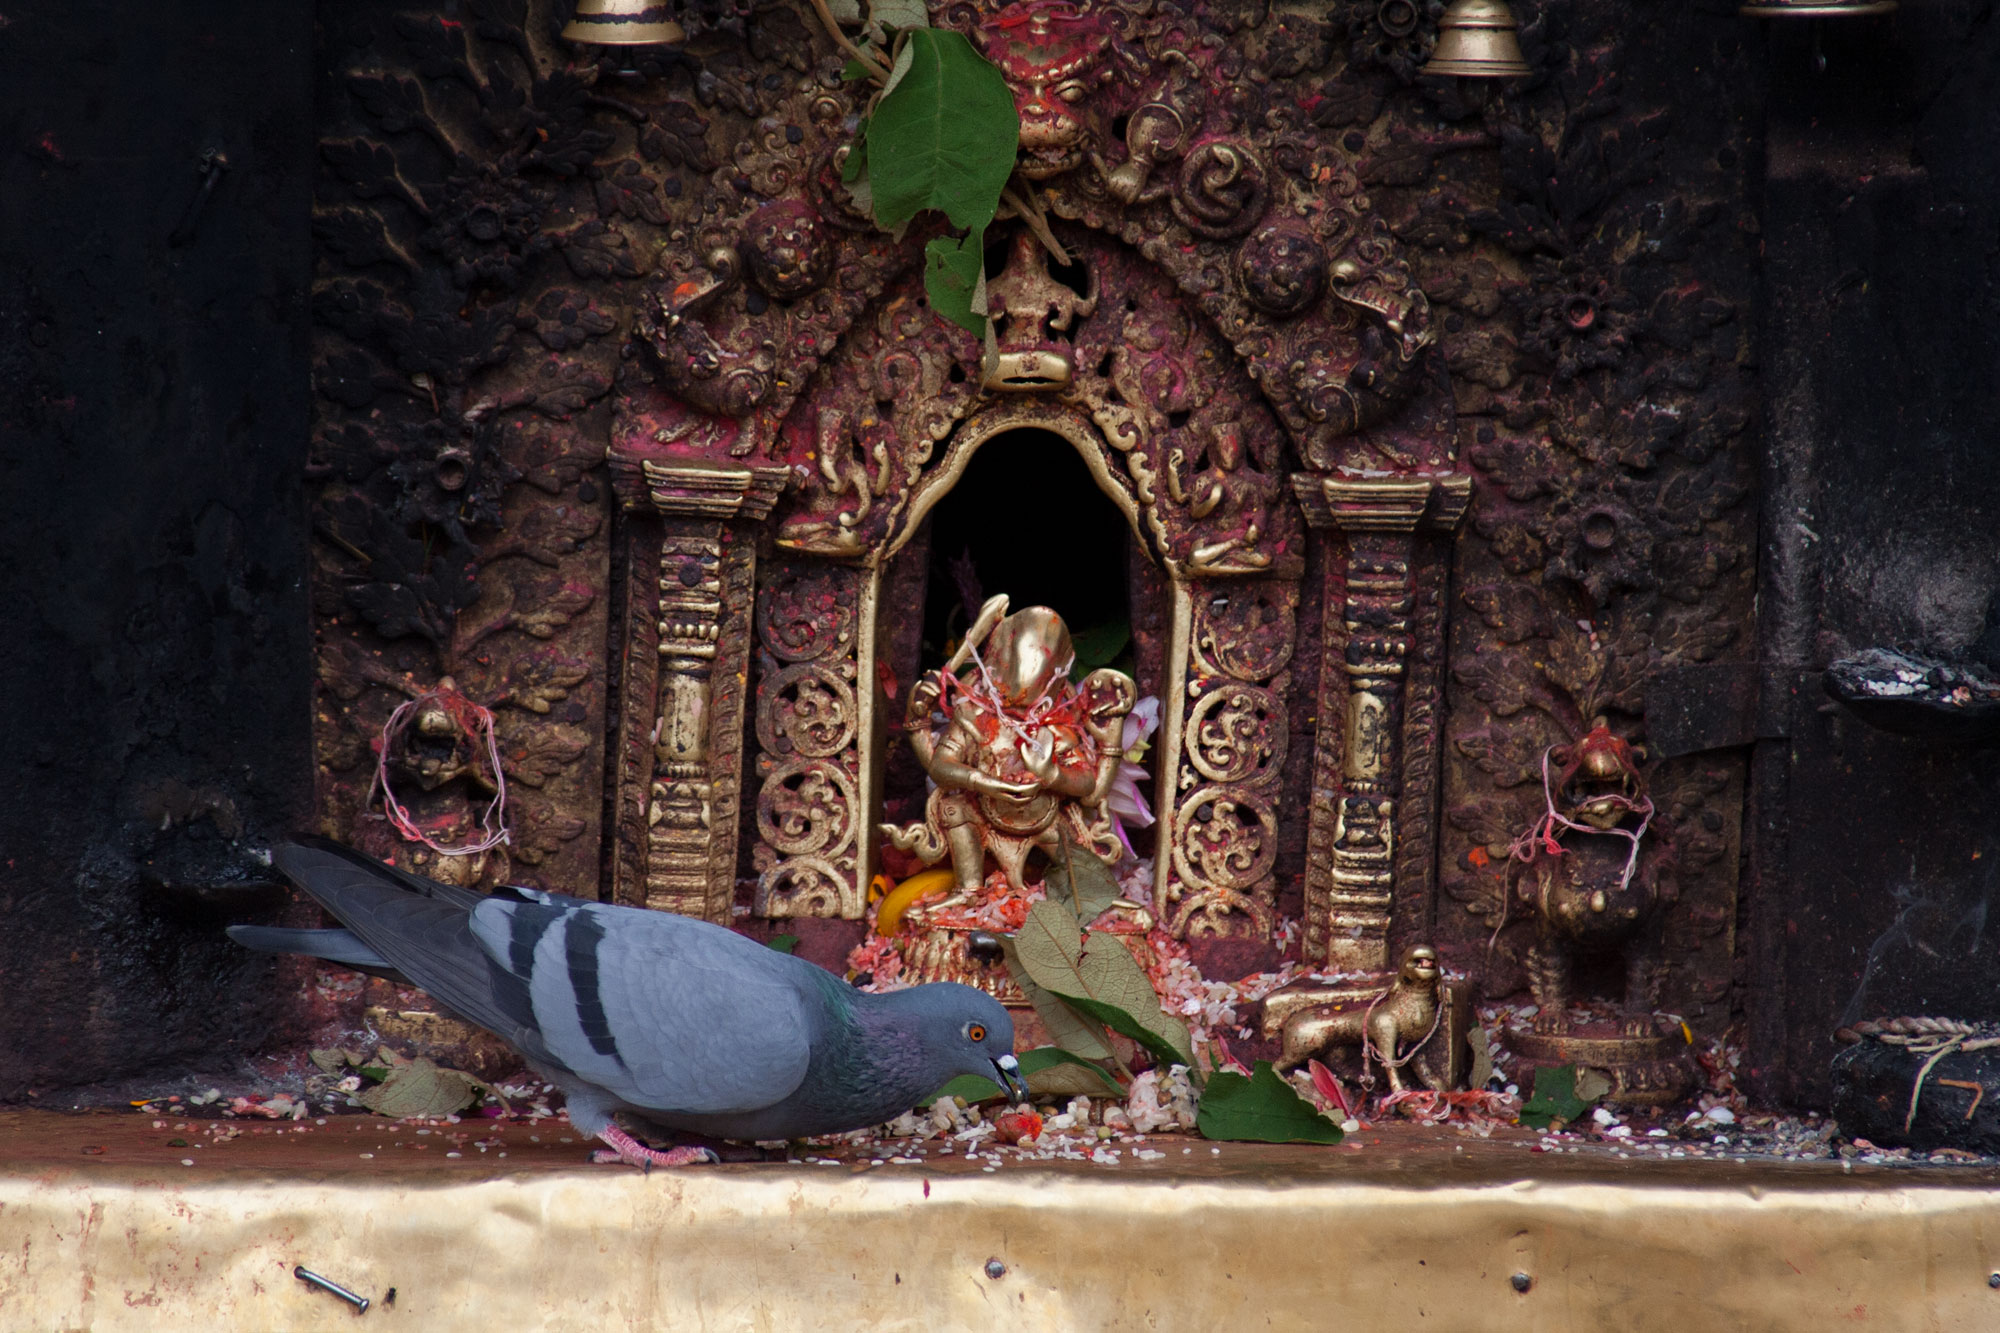 A pigeon eating religious offerings